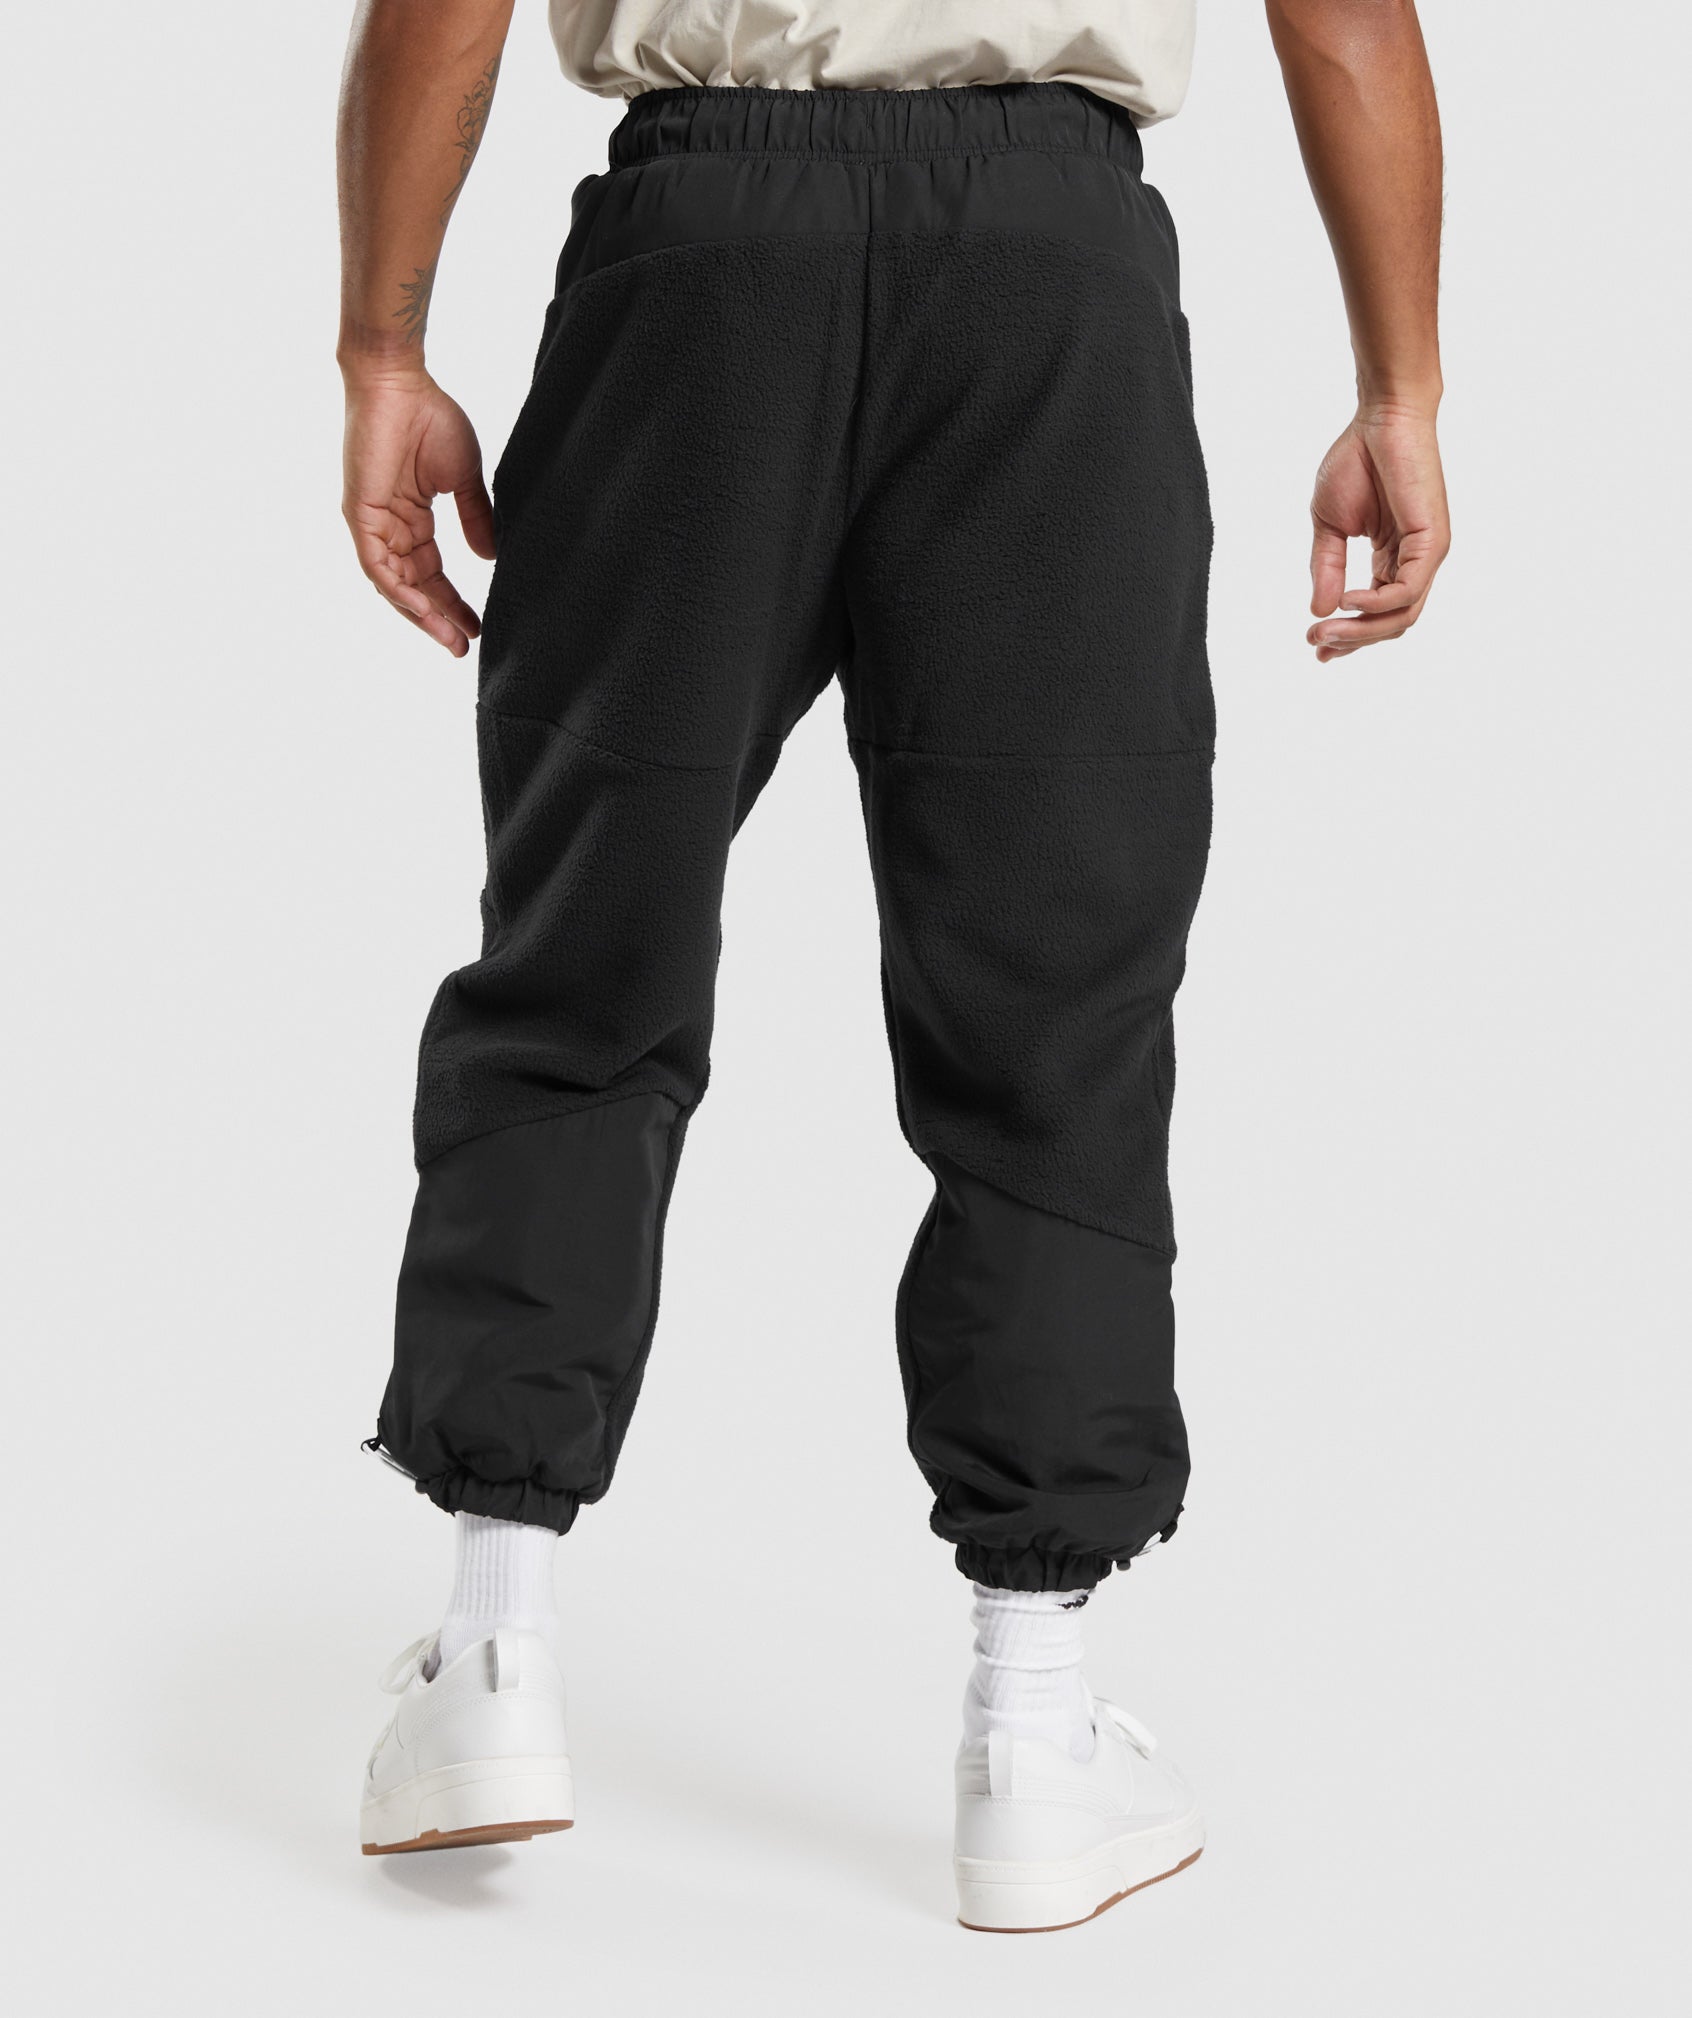 Vibes Joggers in Black